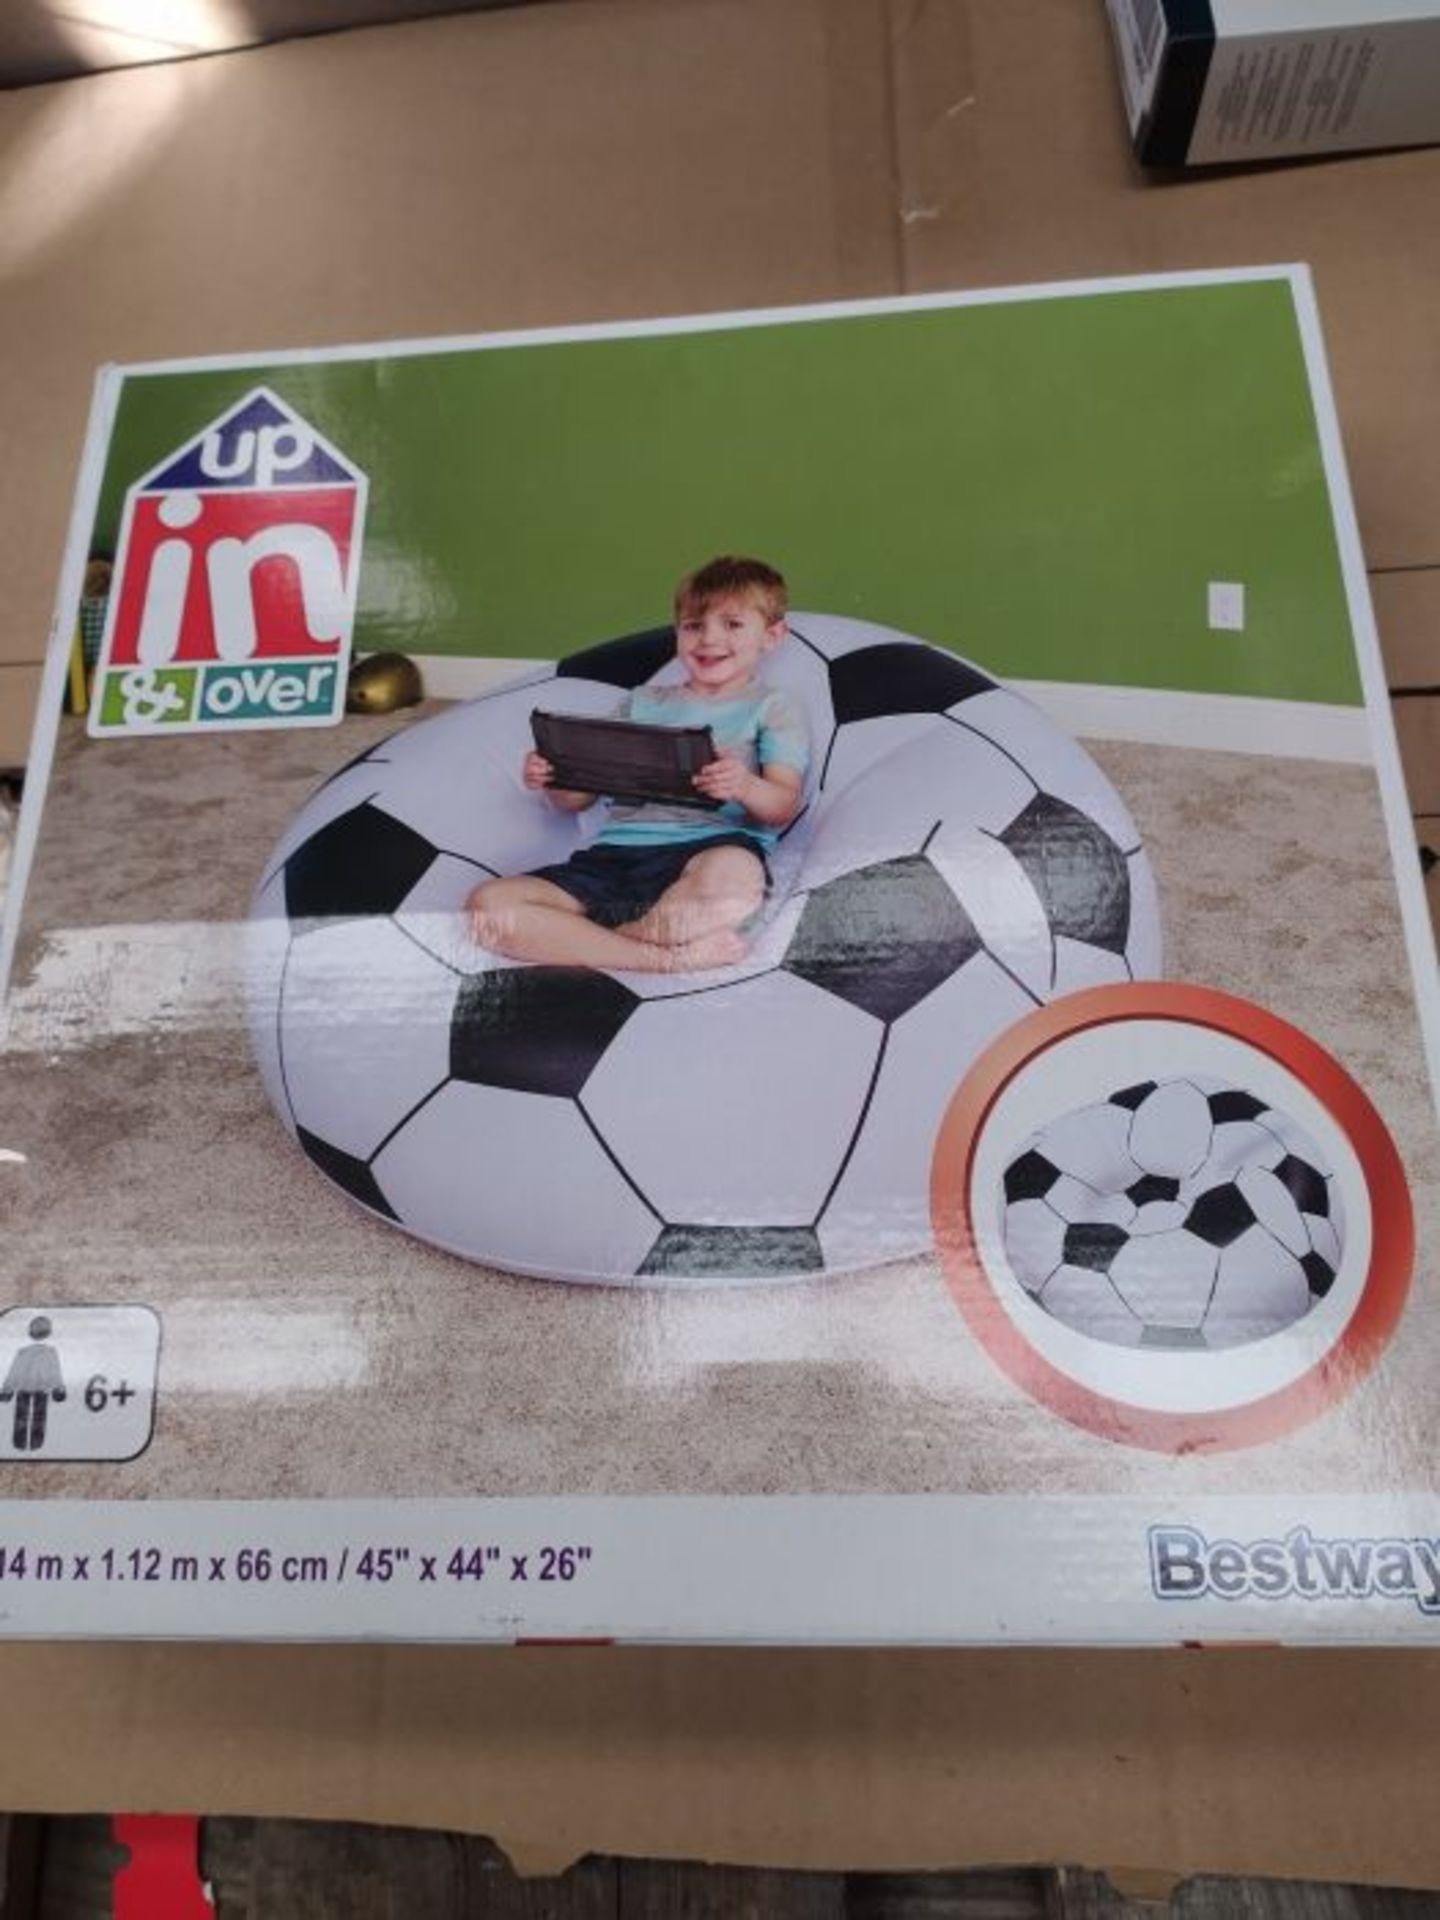 Bestway 45 x 44 x 28-inch Beanless Soccer Ball Chair - Image 2 of 3